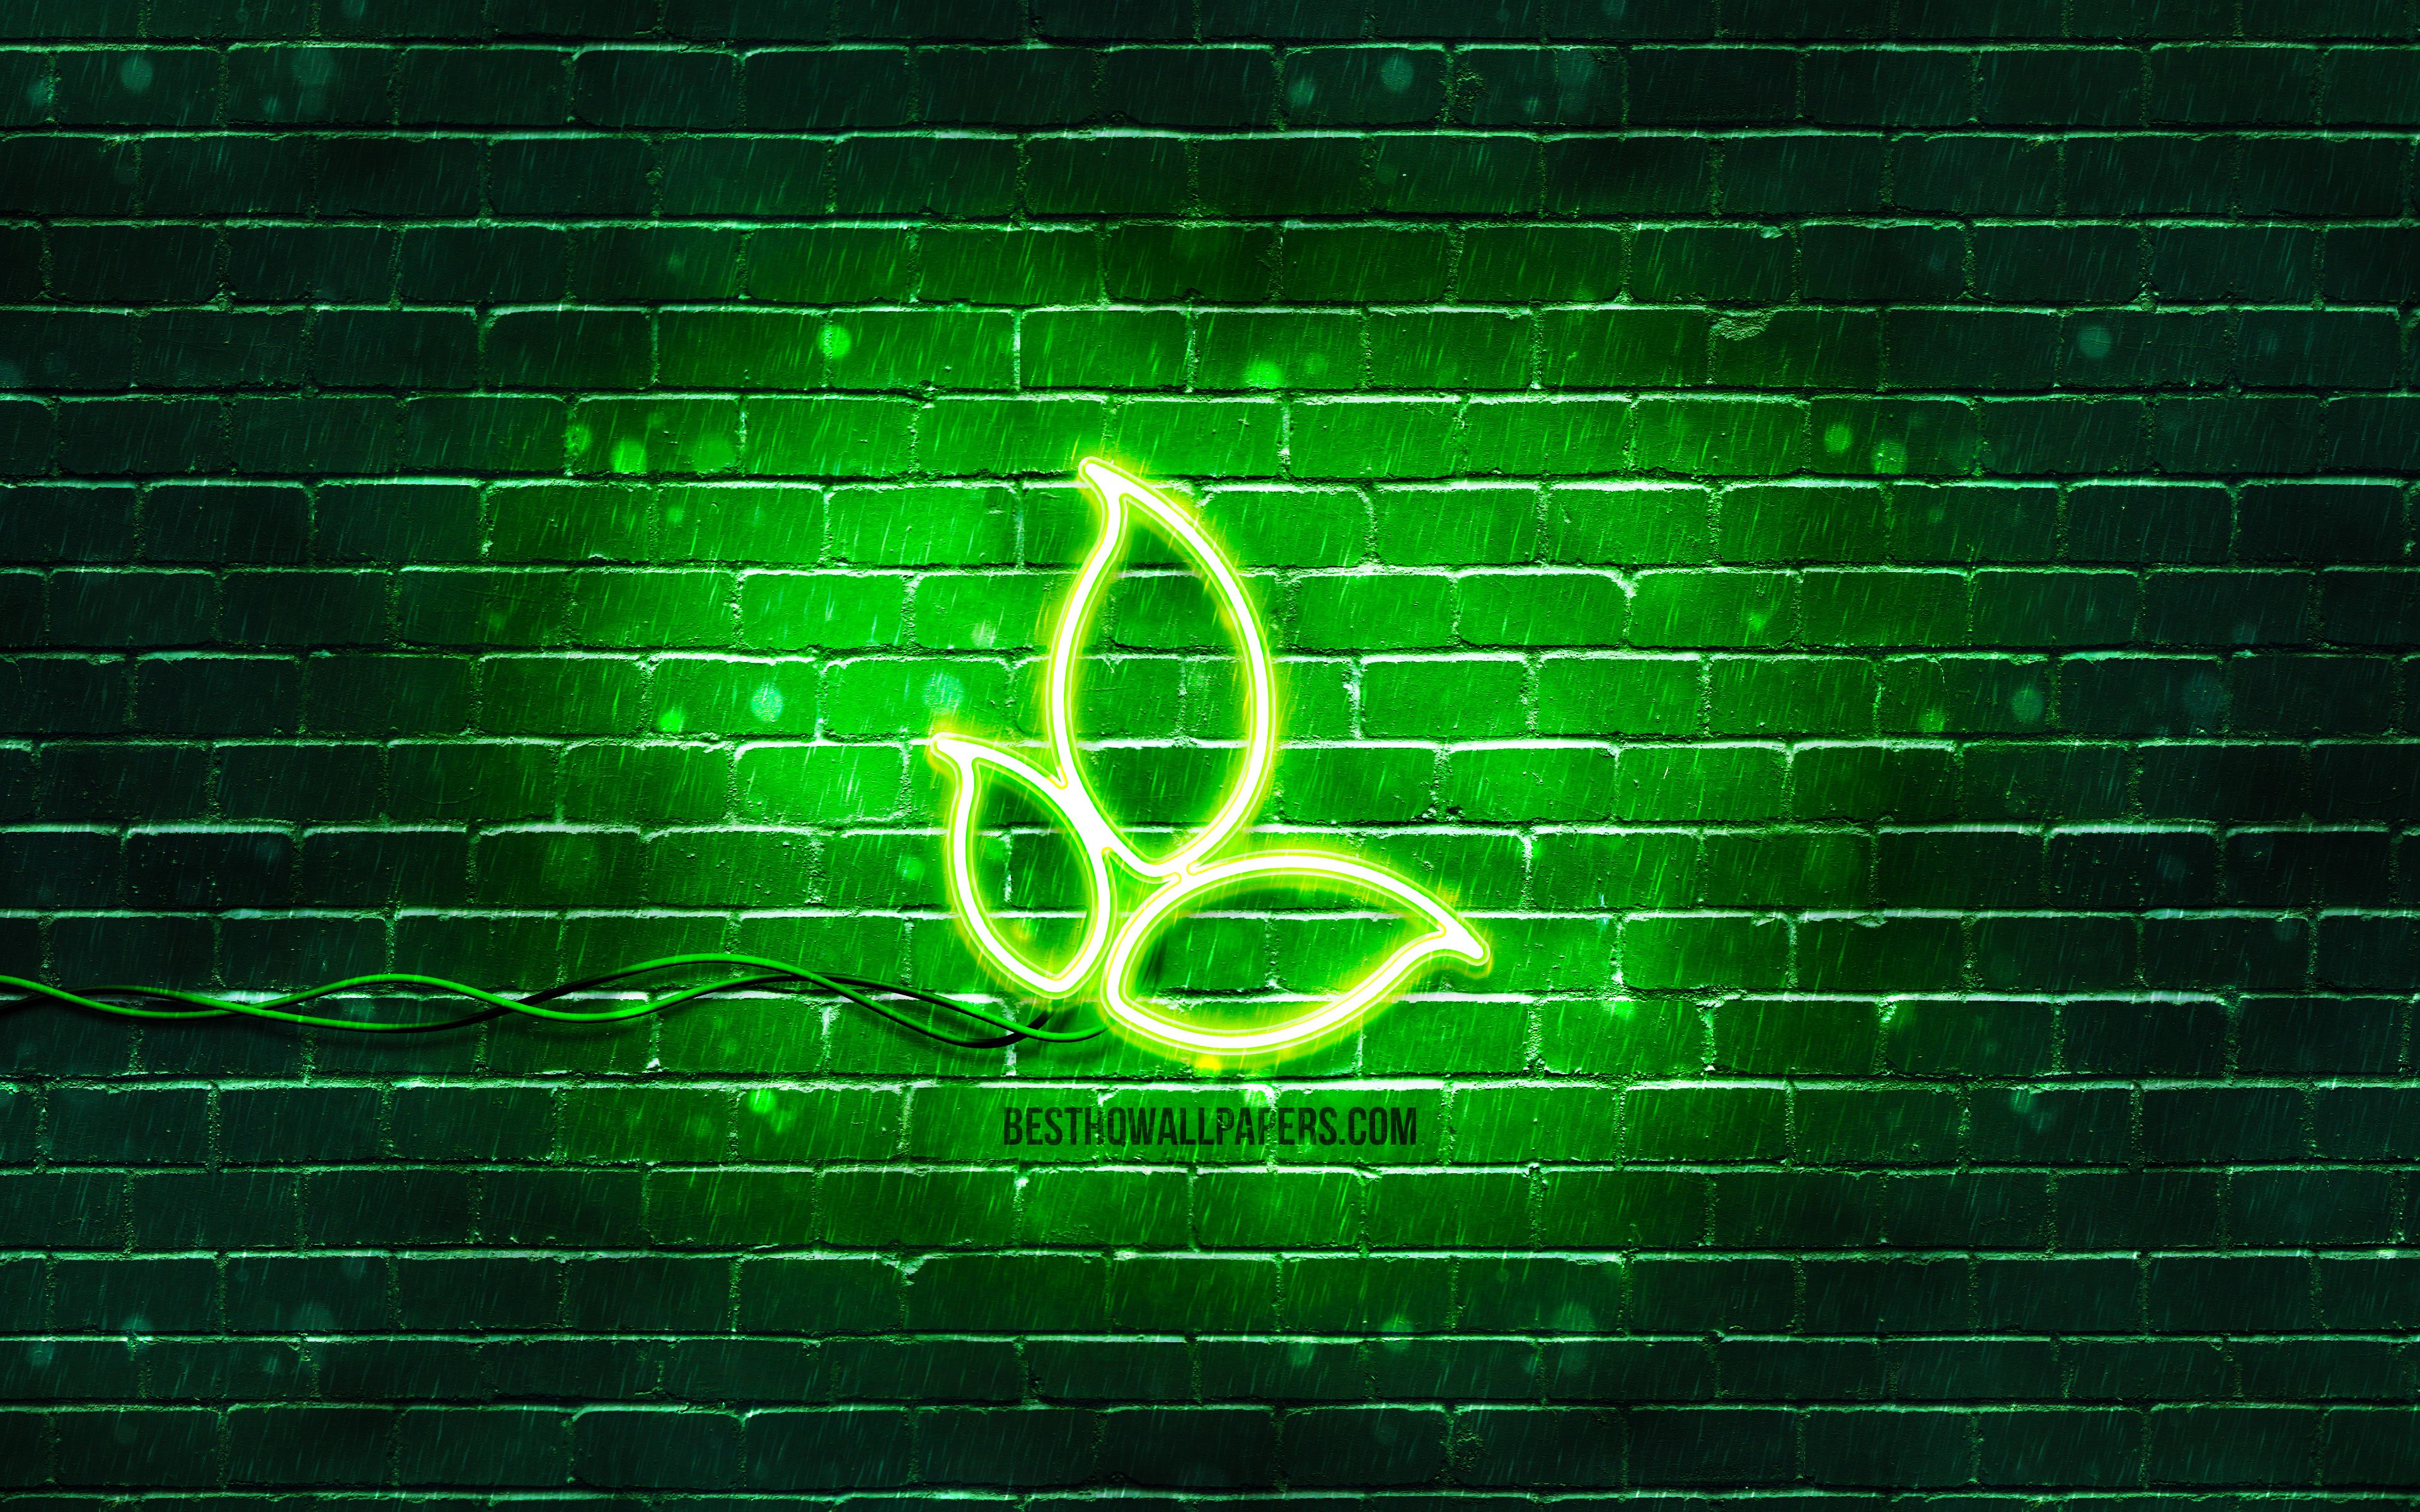 Download wallpaper Leaves neon icon, 4k, green background, neon symbols, Leaves, creative, neon icons, Leaves sign, ecology signs, Leaves icon, ecology icons for desktop with resolution 3840x2400. High Quality HD picture wallpaper